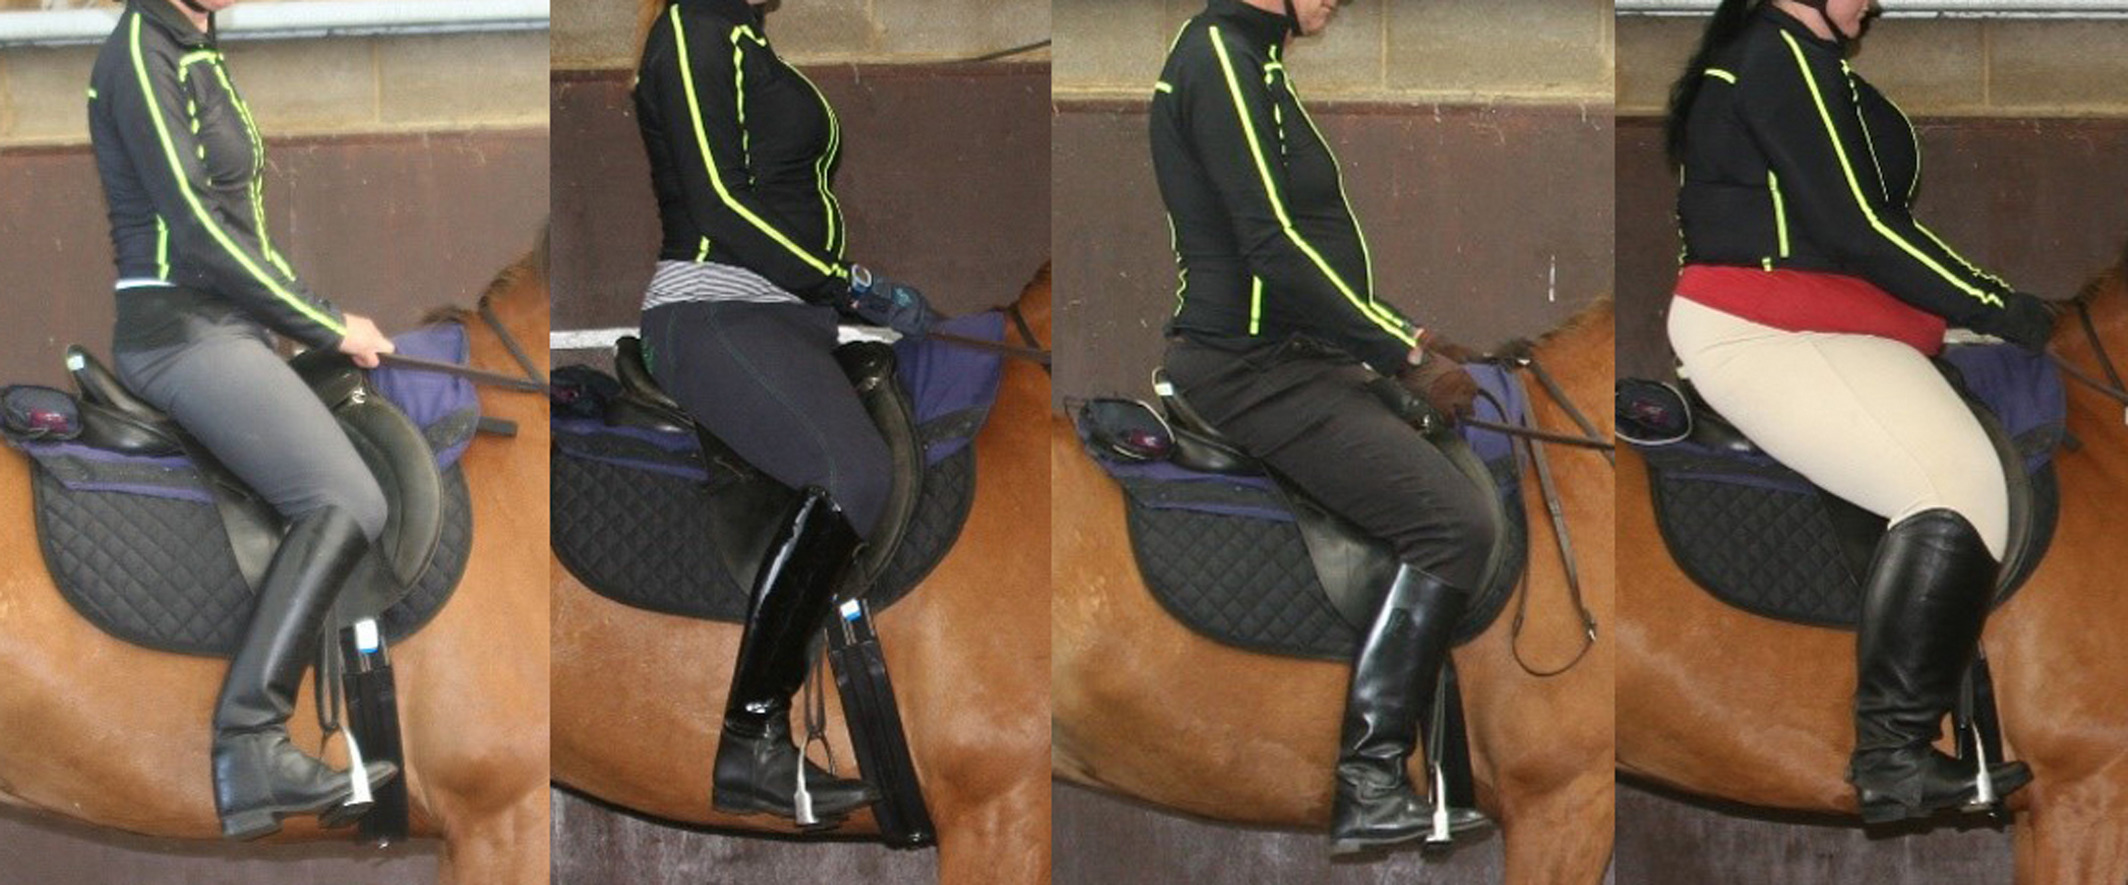 Lateral images of the four riders, from left to right, Light (L), Moderate (M), Heavy (H) and Very Heavy (VH) stationary on Horse 2. The seat of the saddle is of correct length for riders L and M, is short for rider H, who is sitting on the back of the cantle, and is very short for rider VH, whose seat extends beyond the cantle. There is lack of vertical alignment of the shoulder, tuber coxae (‘hip') and heel for riders H and VH.